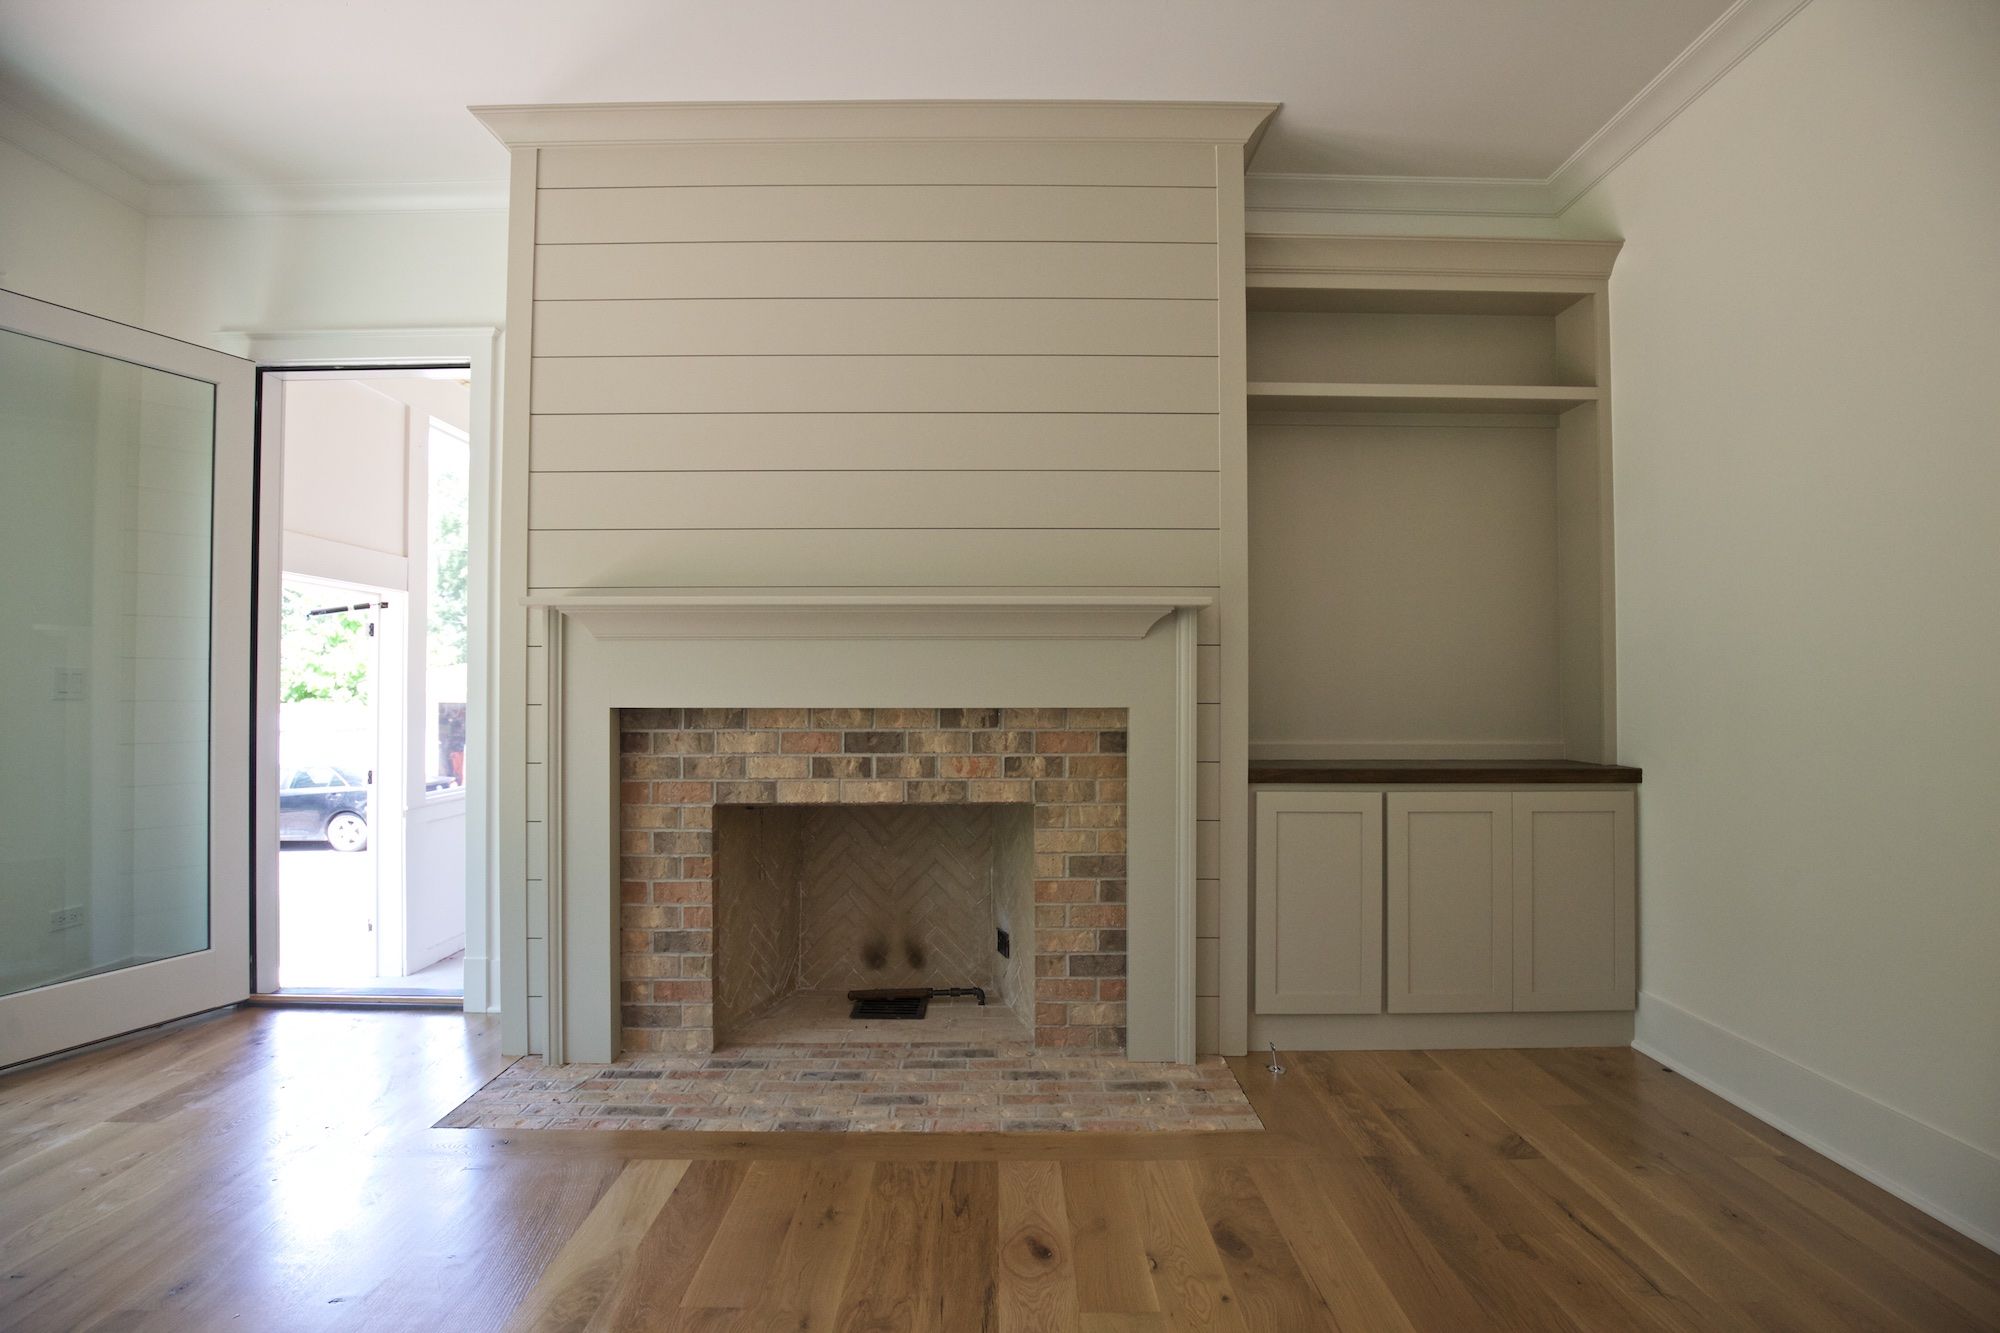 Shiplap Fireplace Ideas Best Of Shiplap Fireplace Surround In Family Room